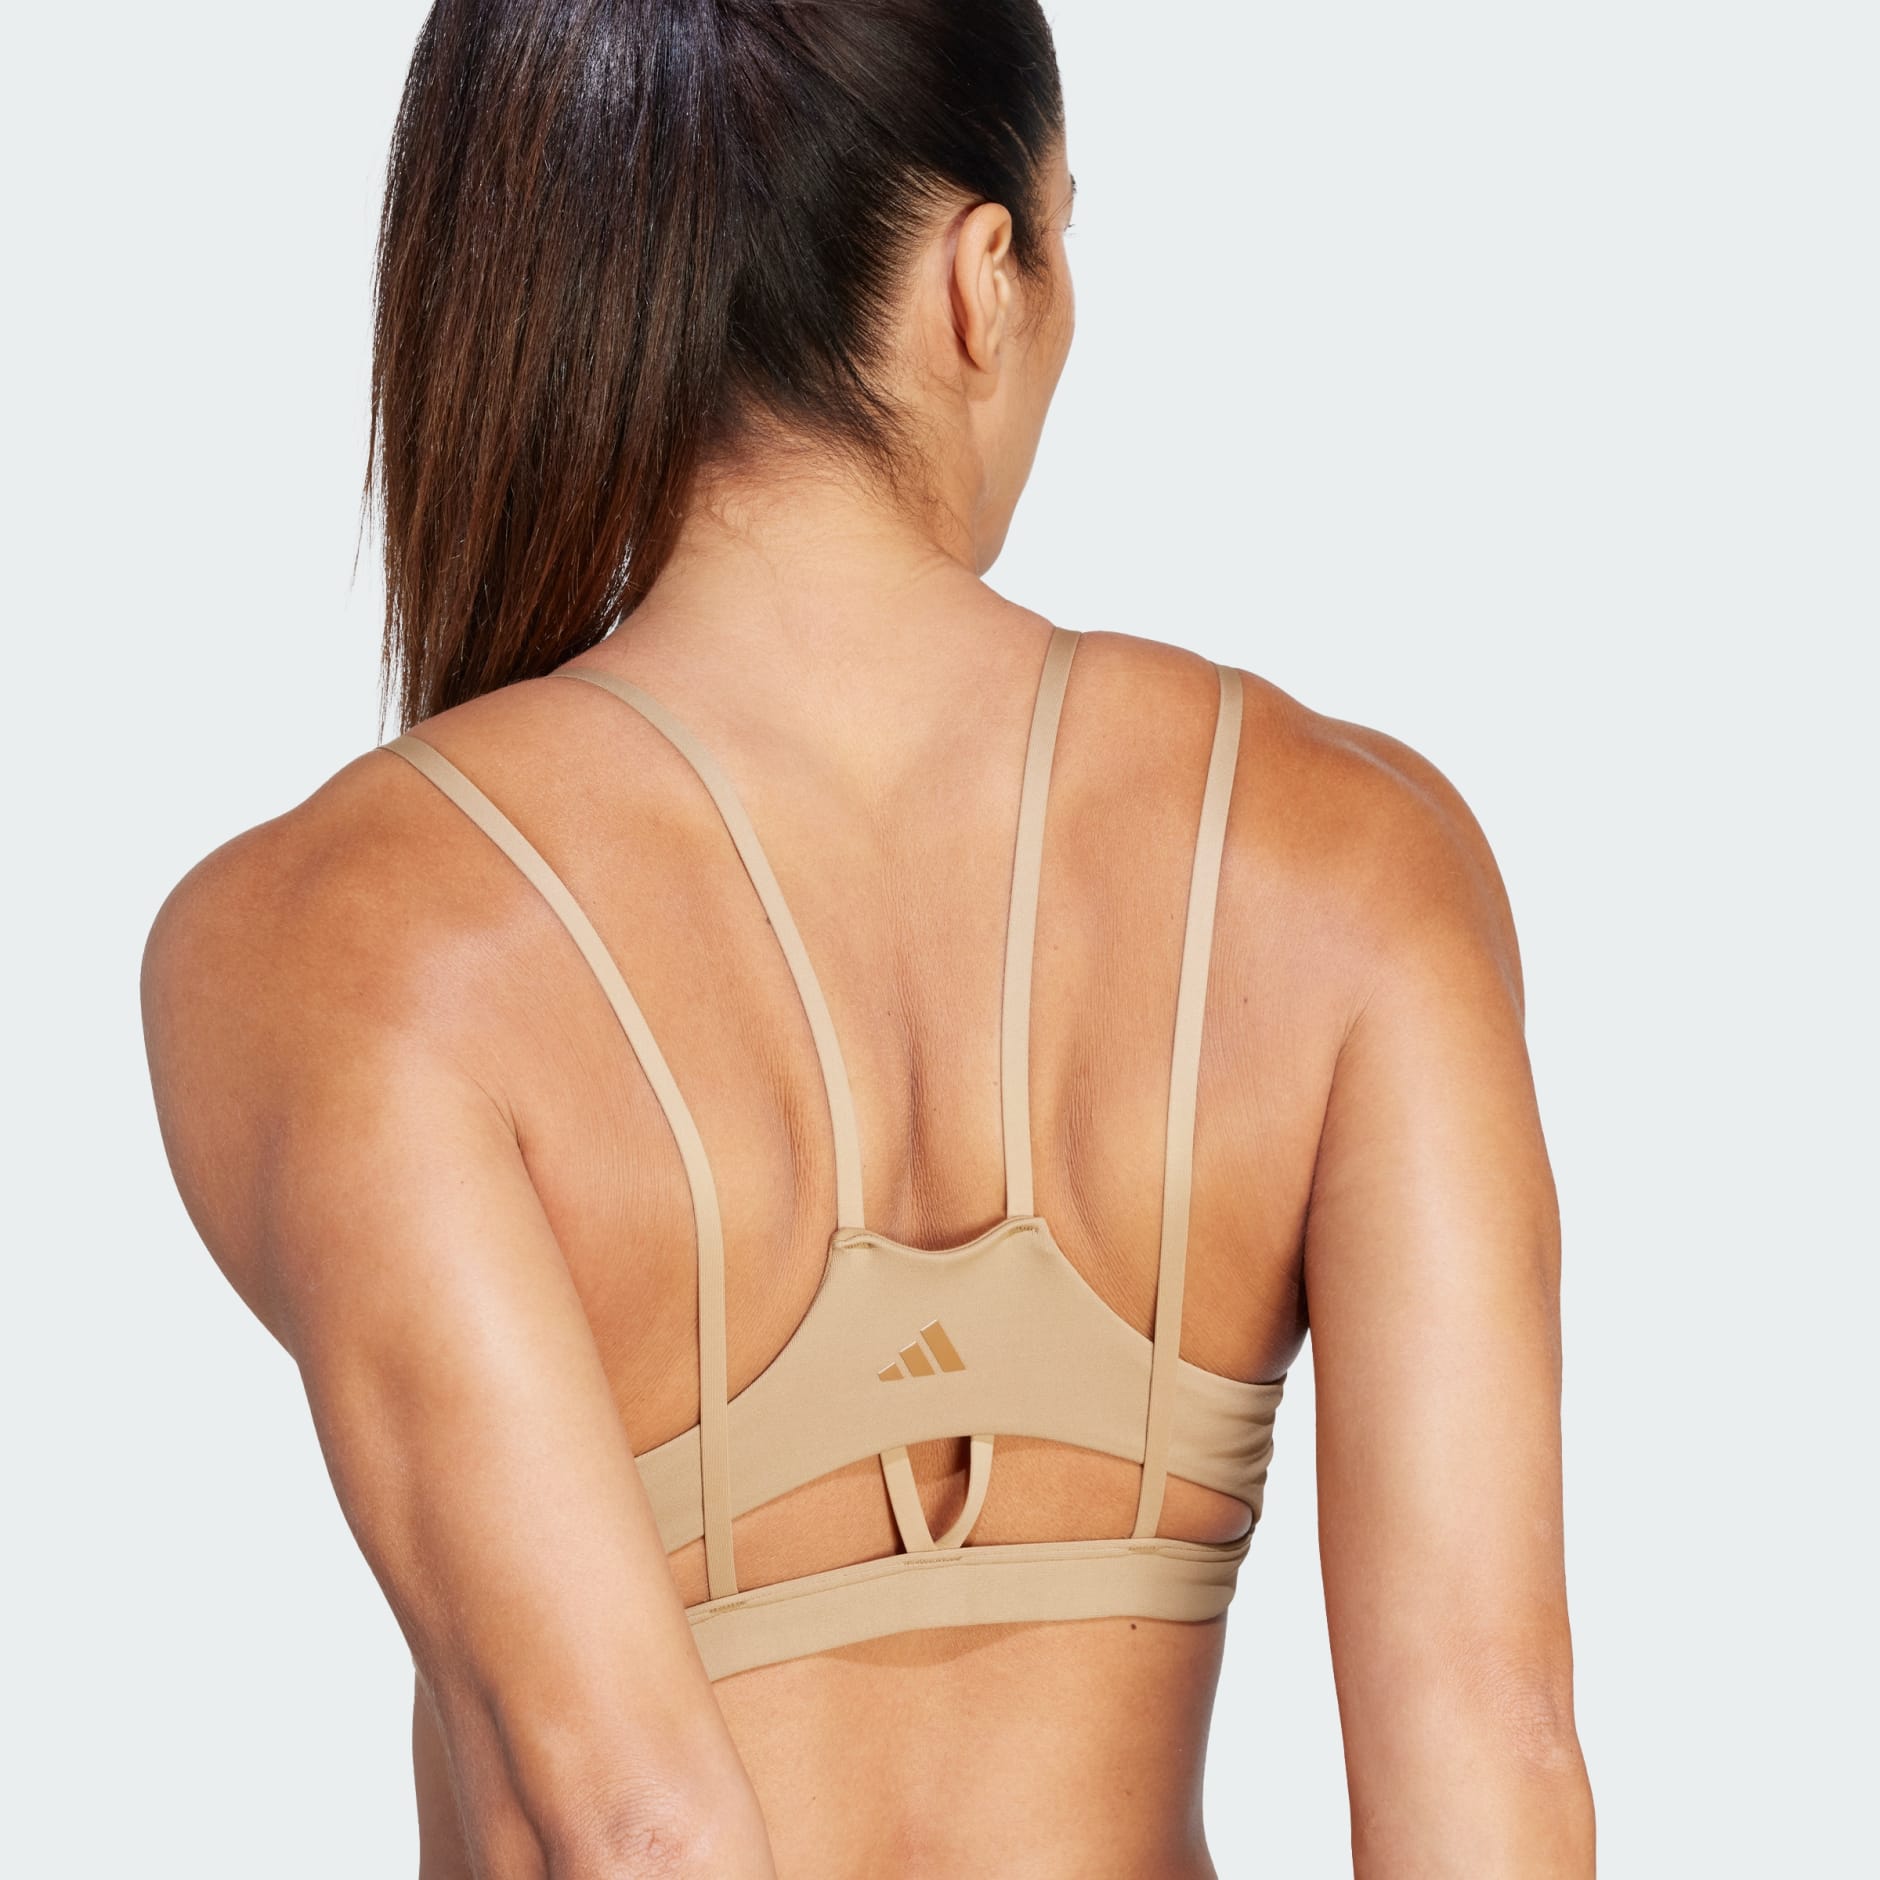 Backless Bra - Strappy Back Light Support Bra with Removable Cups